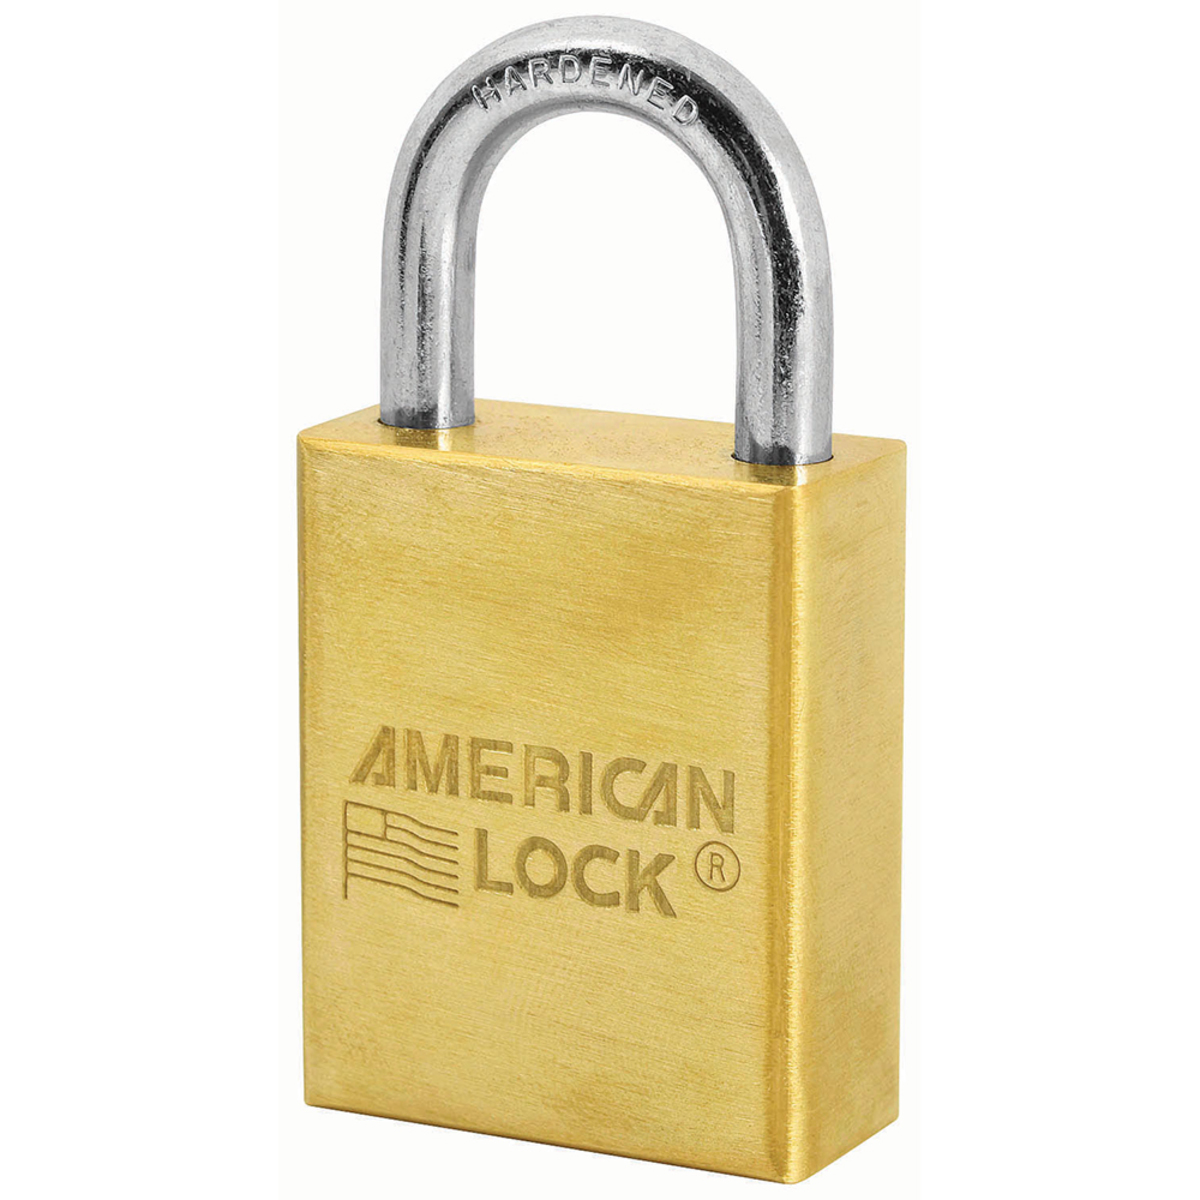 American Lock® Brass Solid Brass General Security Padlock Boron Alloy Shackle